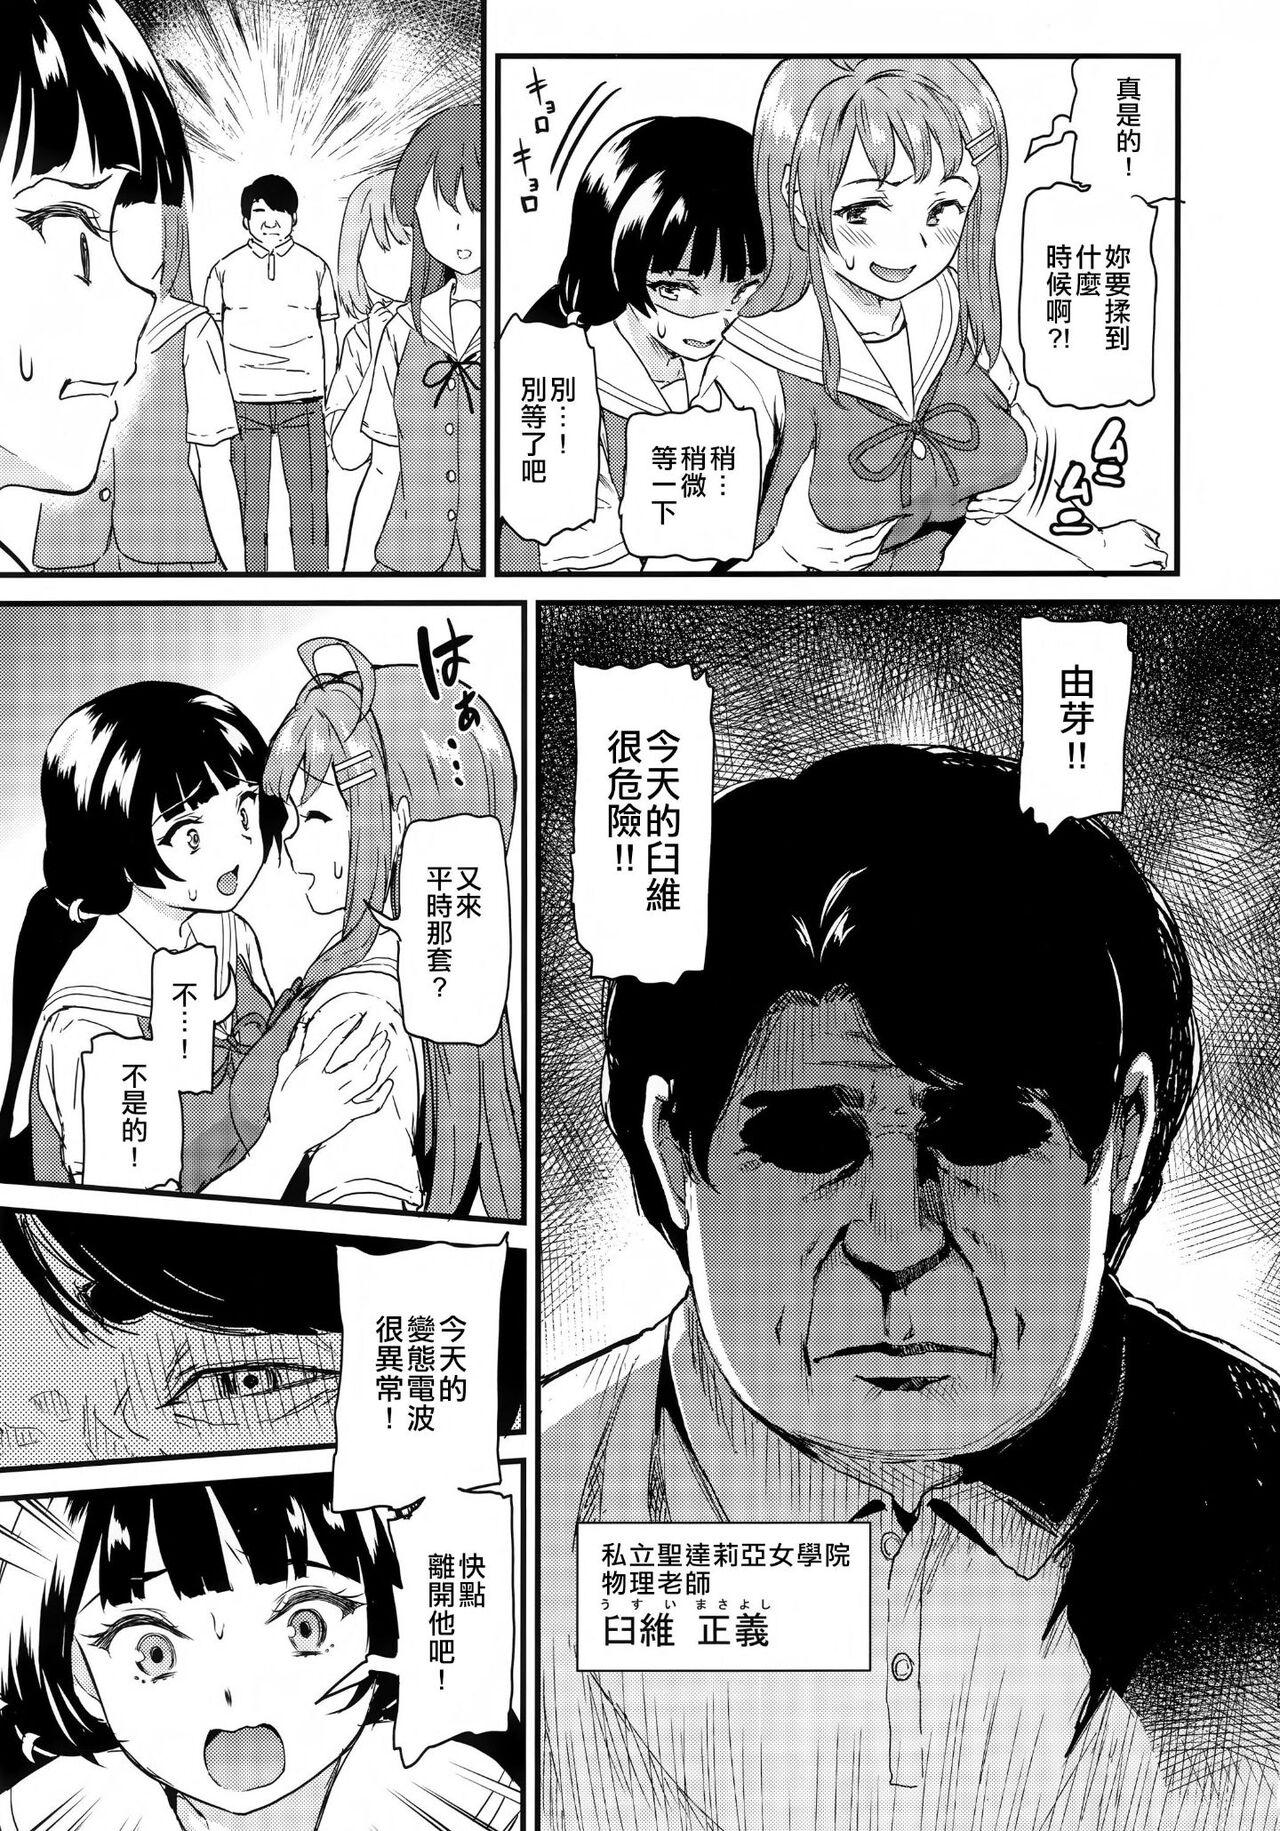 Latin 推シツケ From - Page 4